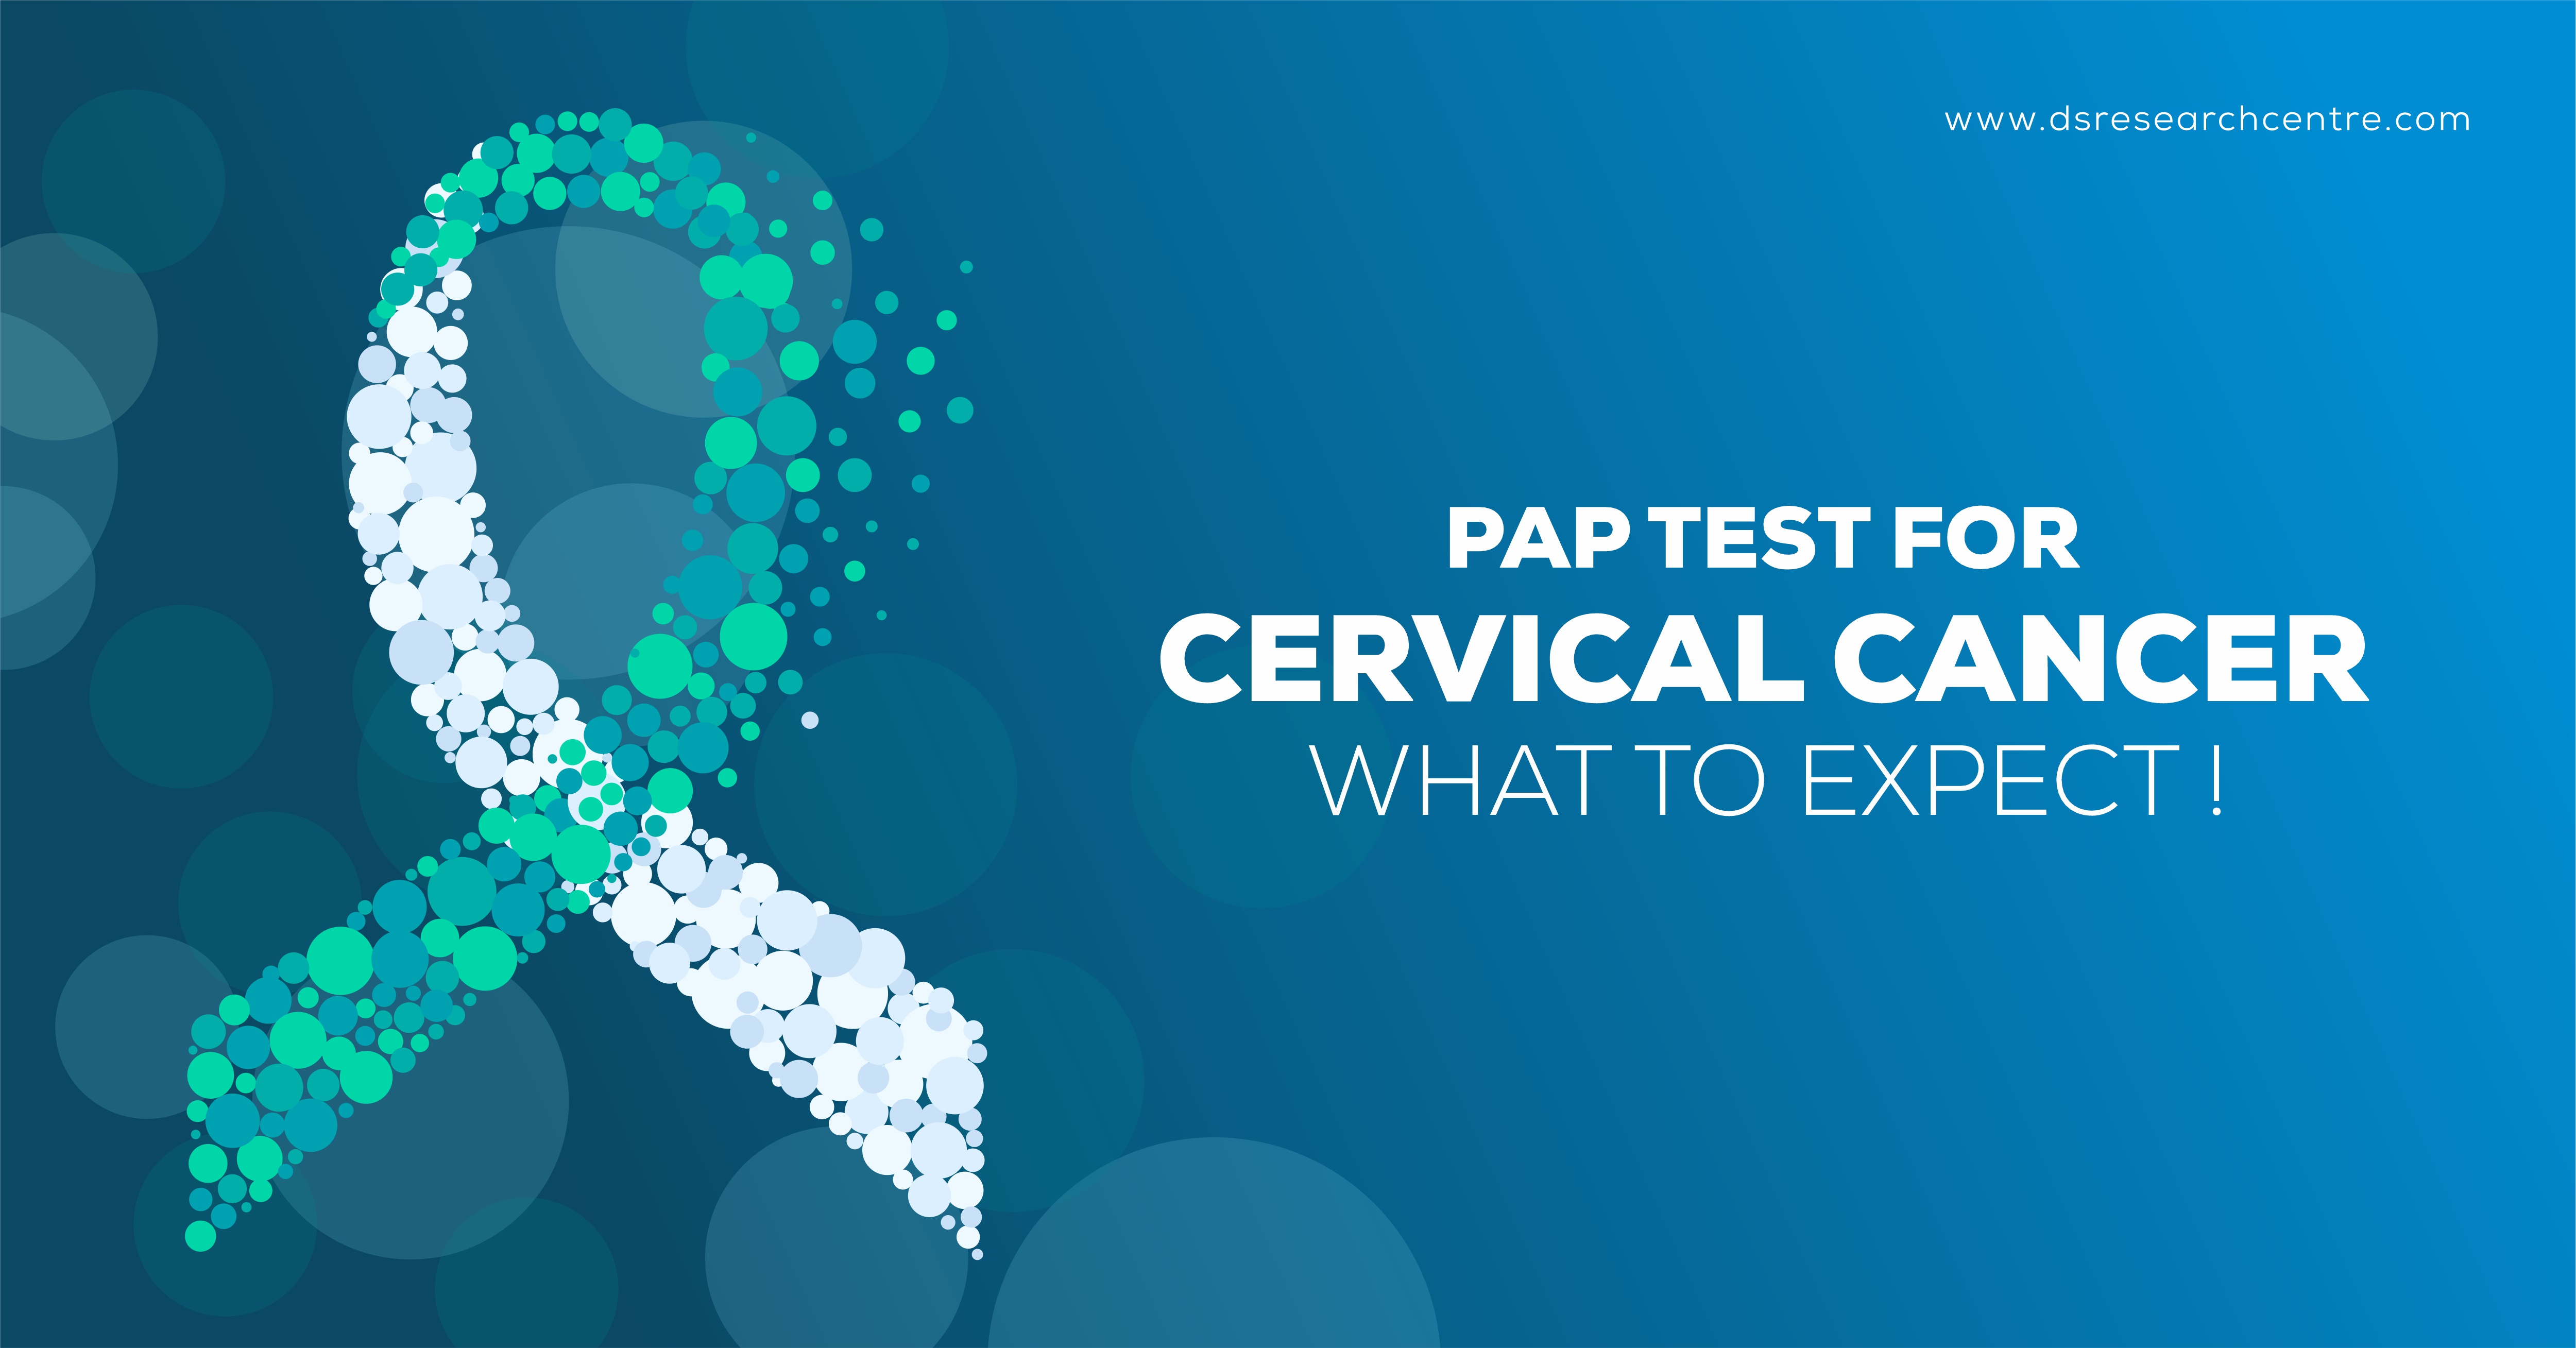 Pap Test for Cervical Cancer - what to expect !